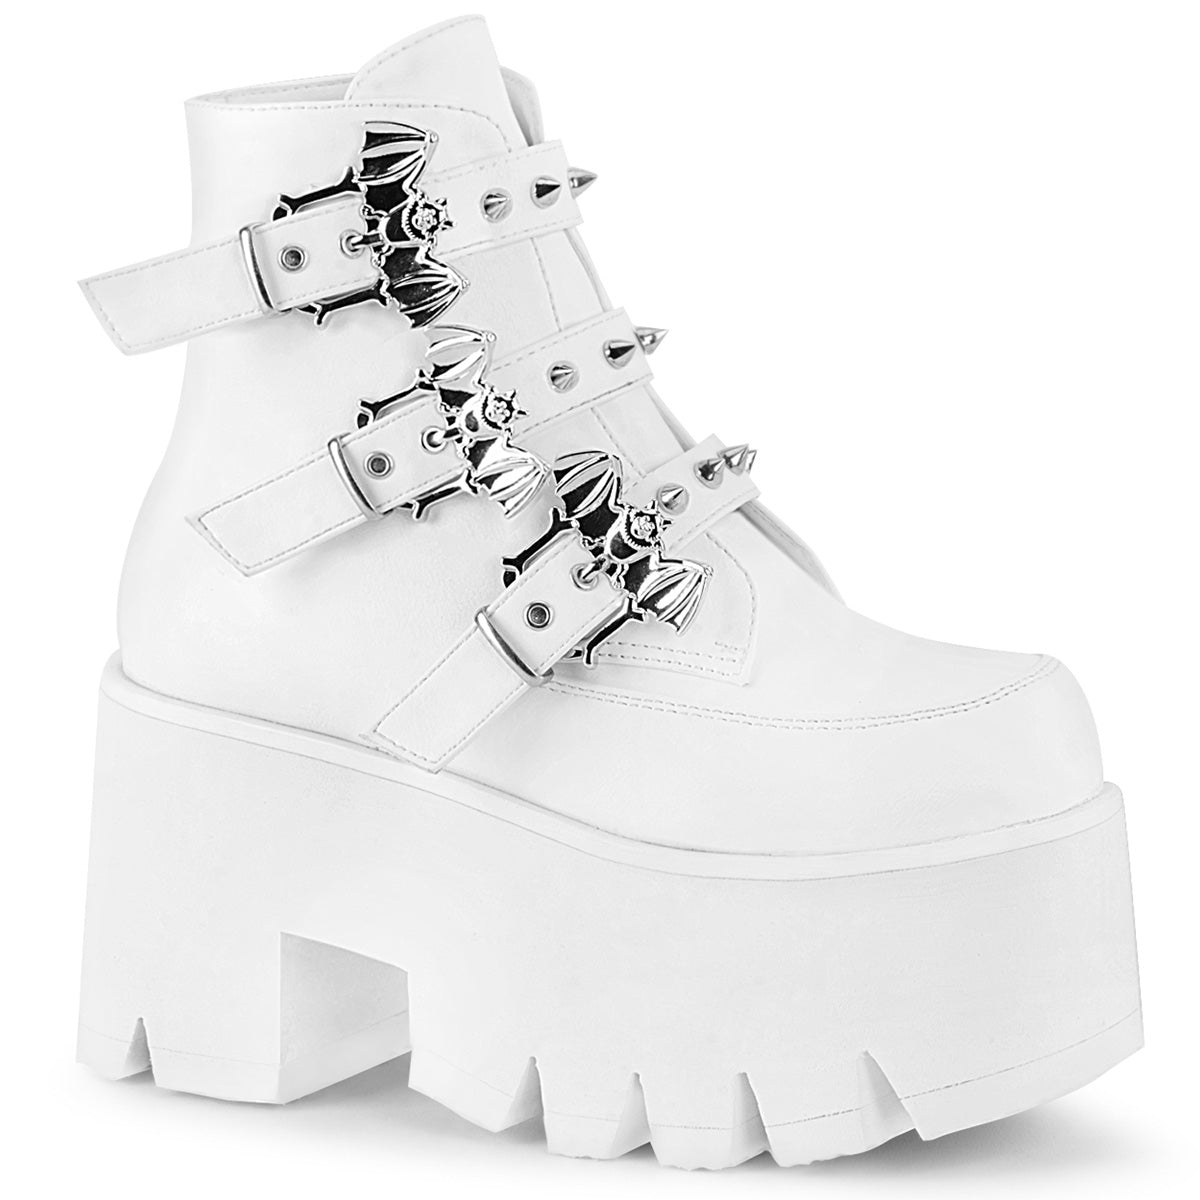 DemoniaCult Womens Ankle Boots ASHES-55 Wht Vegan Leather